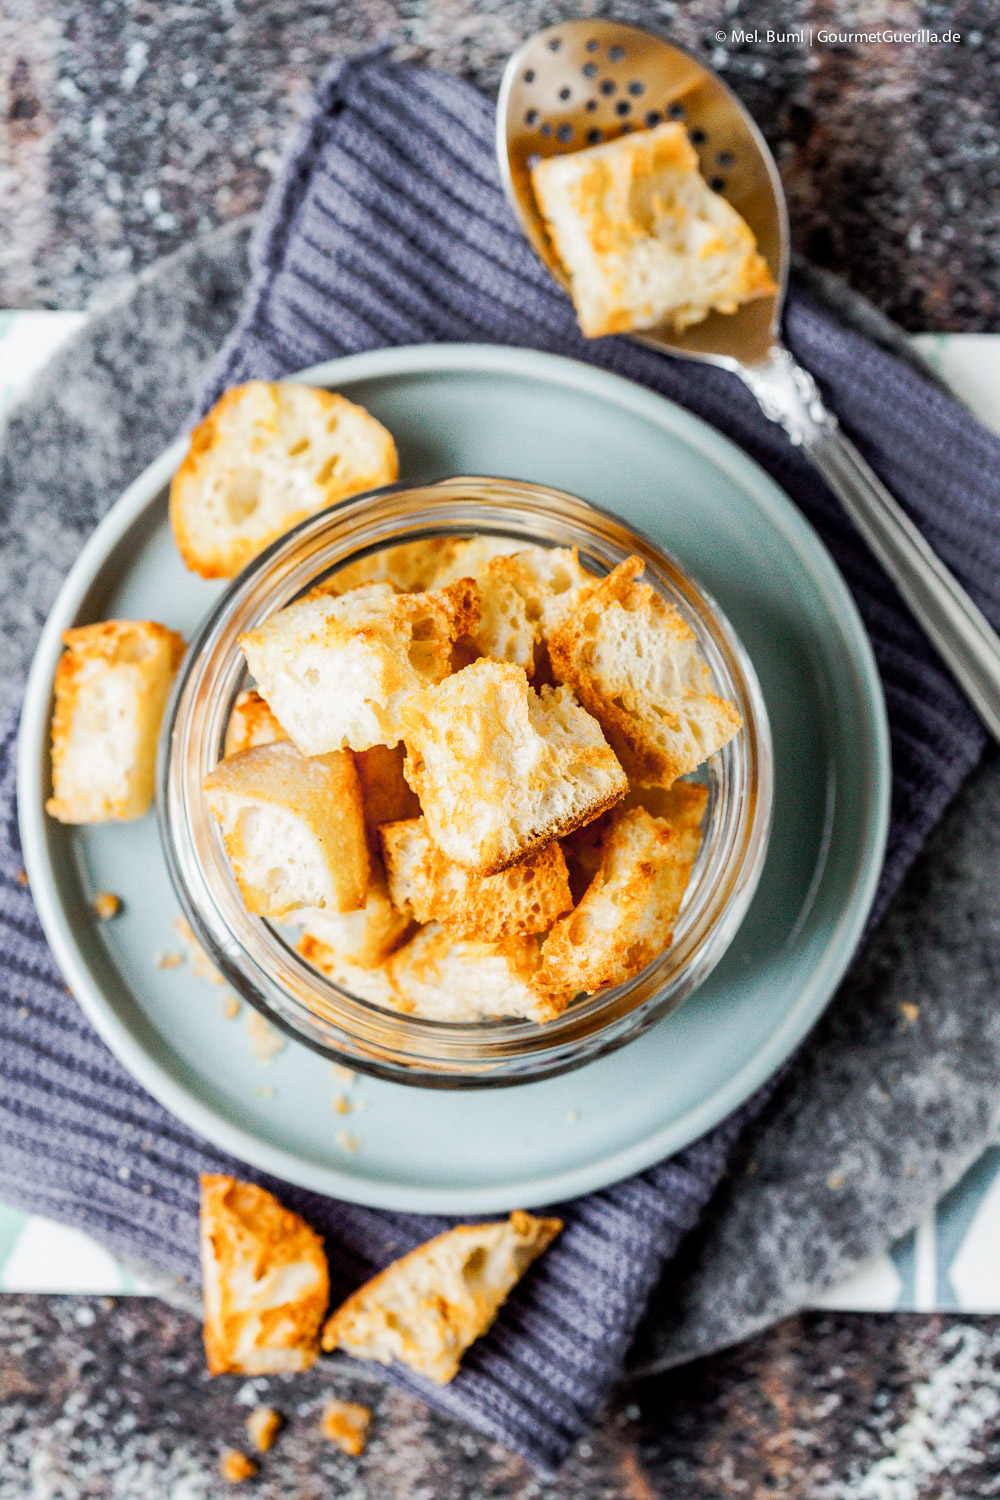 Selected 5-minute garlic croutons from the airfryer - low-fat and quickly finished | GourmetGuerilla.com